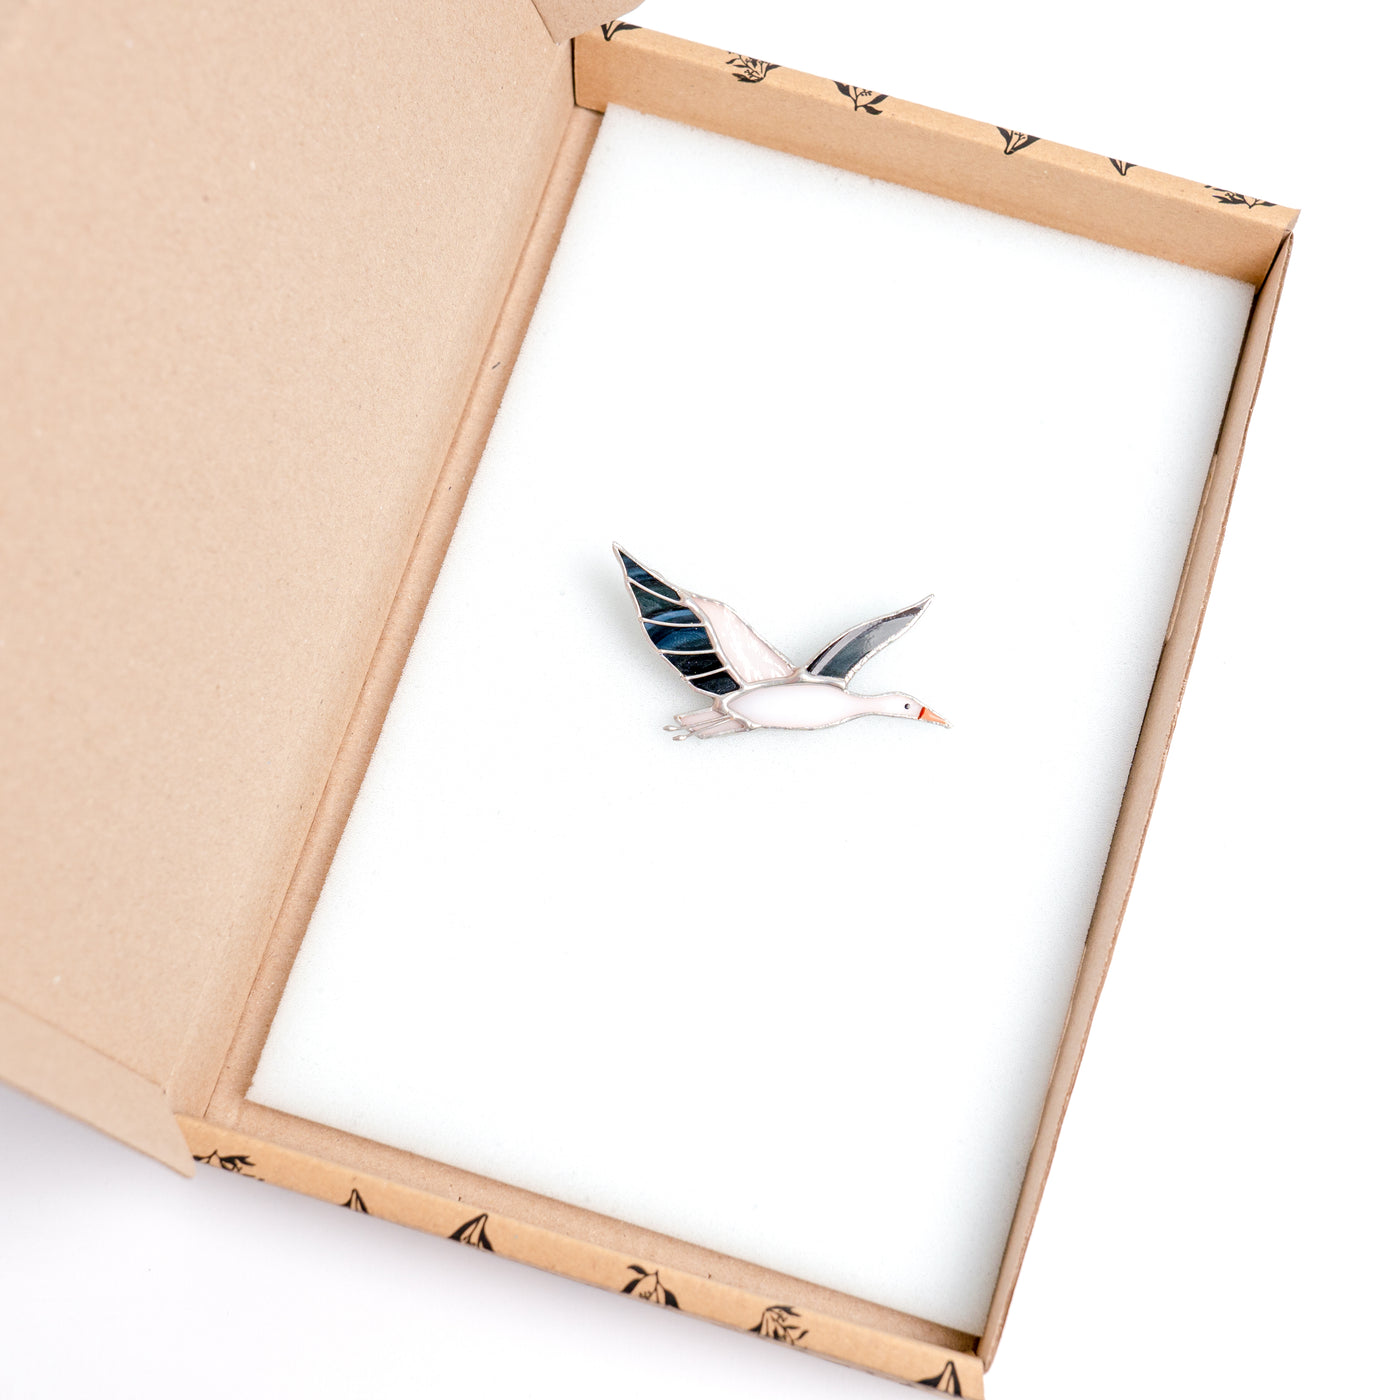 Stained glass stork brooch in a brand box